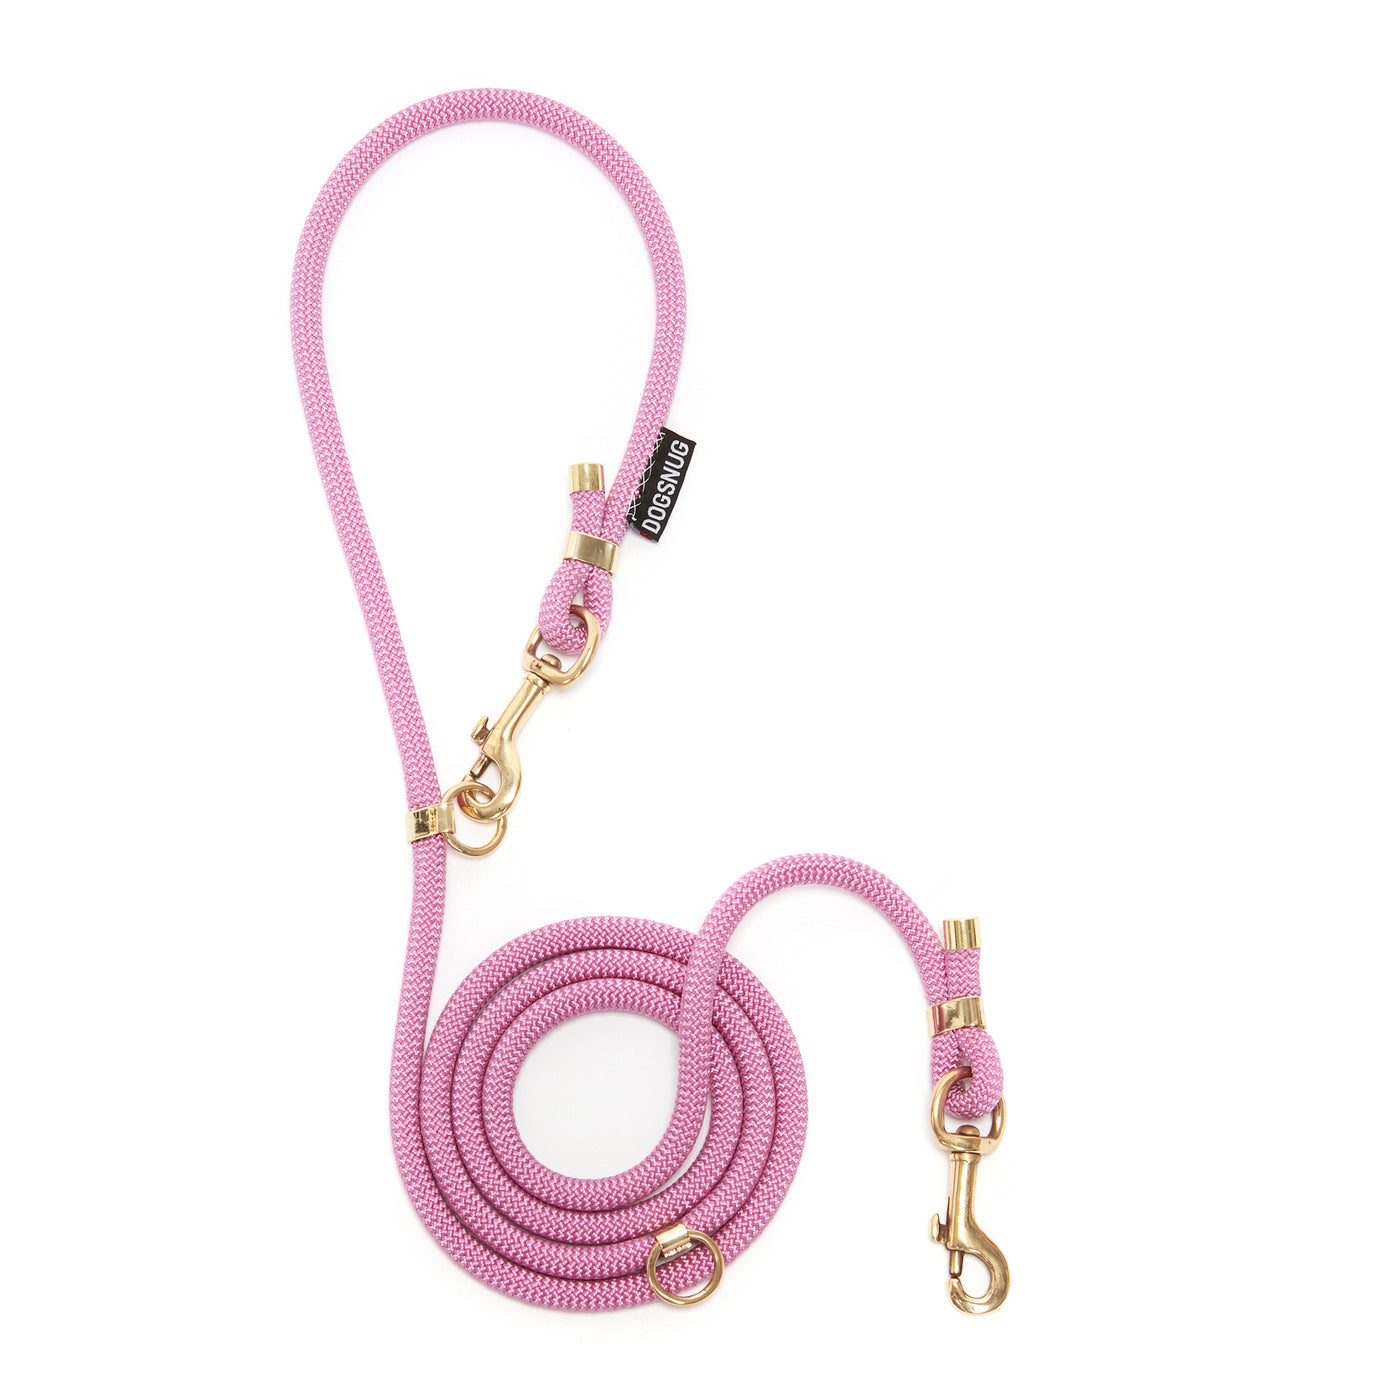 Hands Free Rope Dog Lead